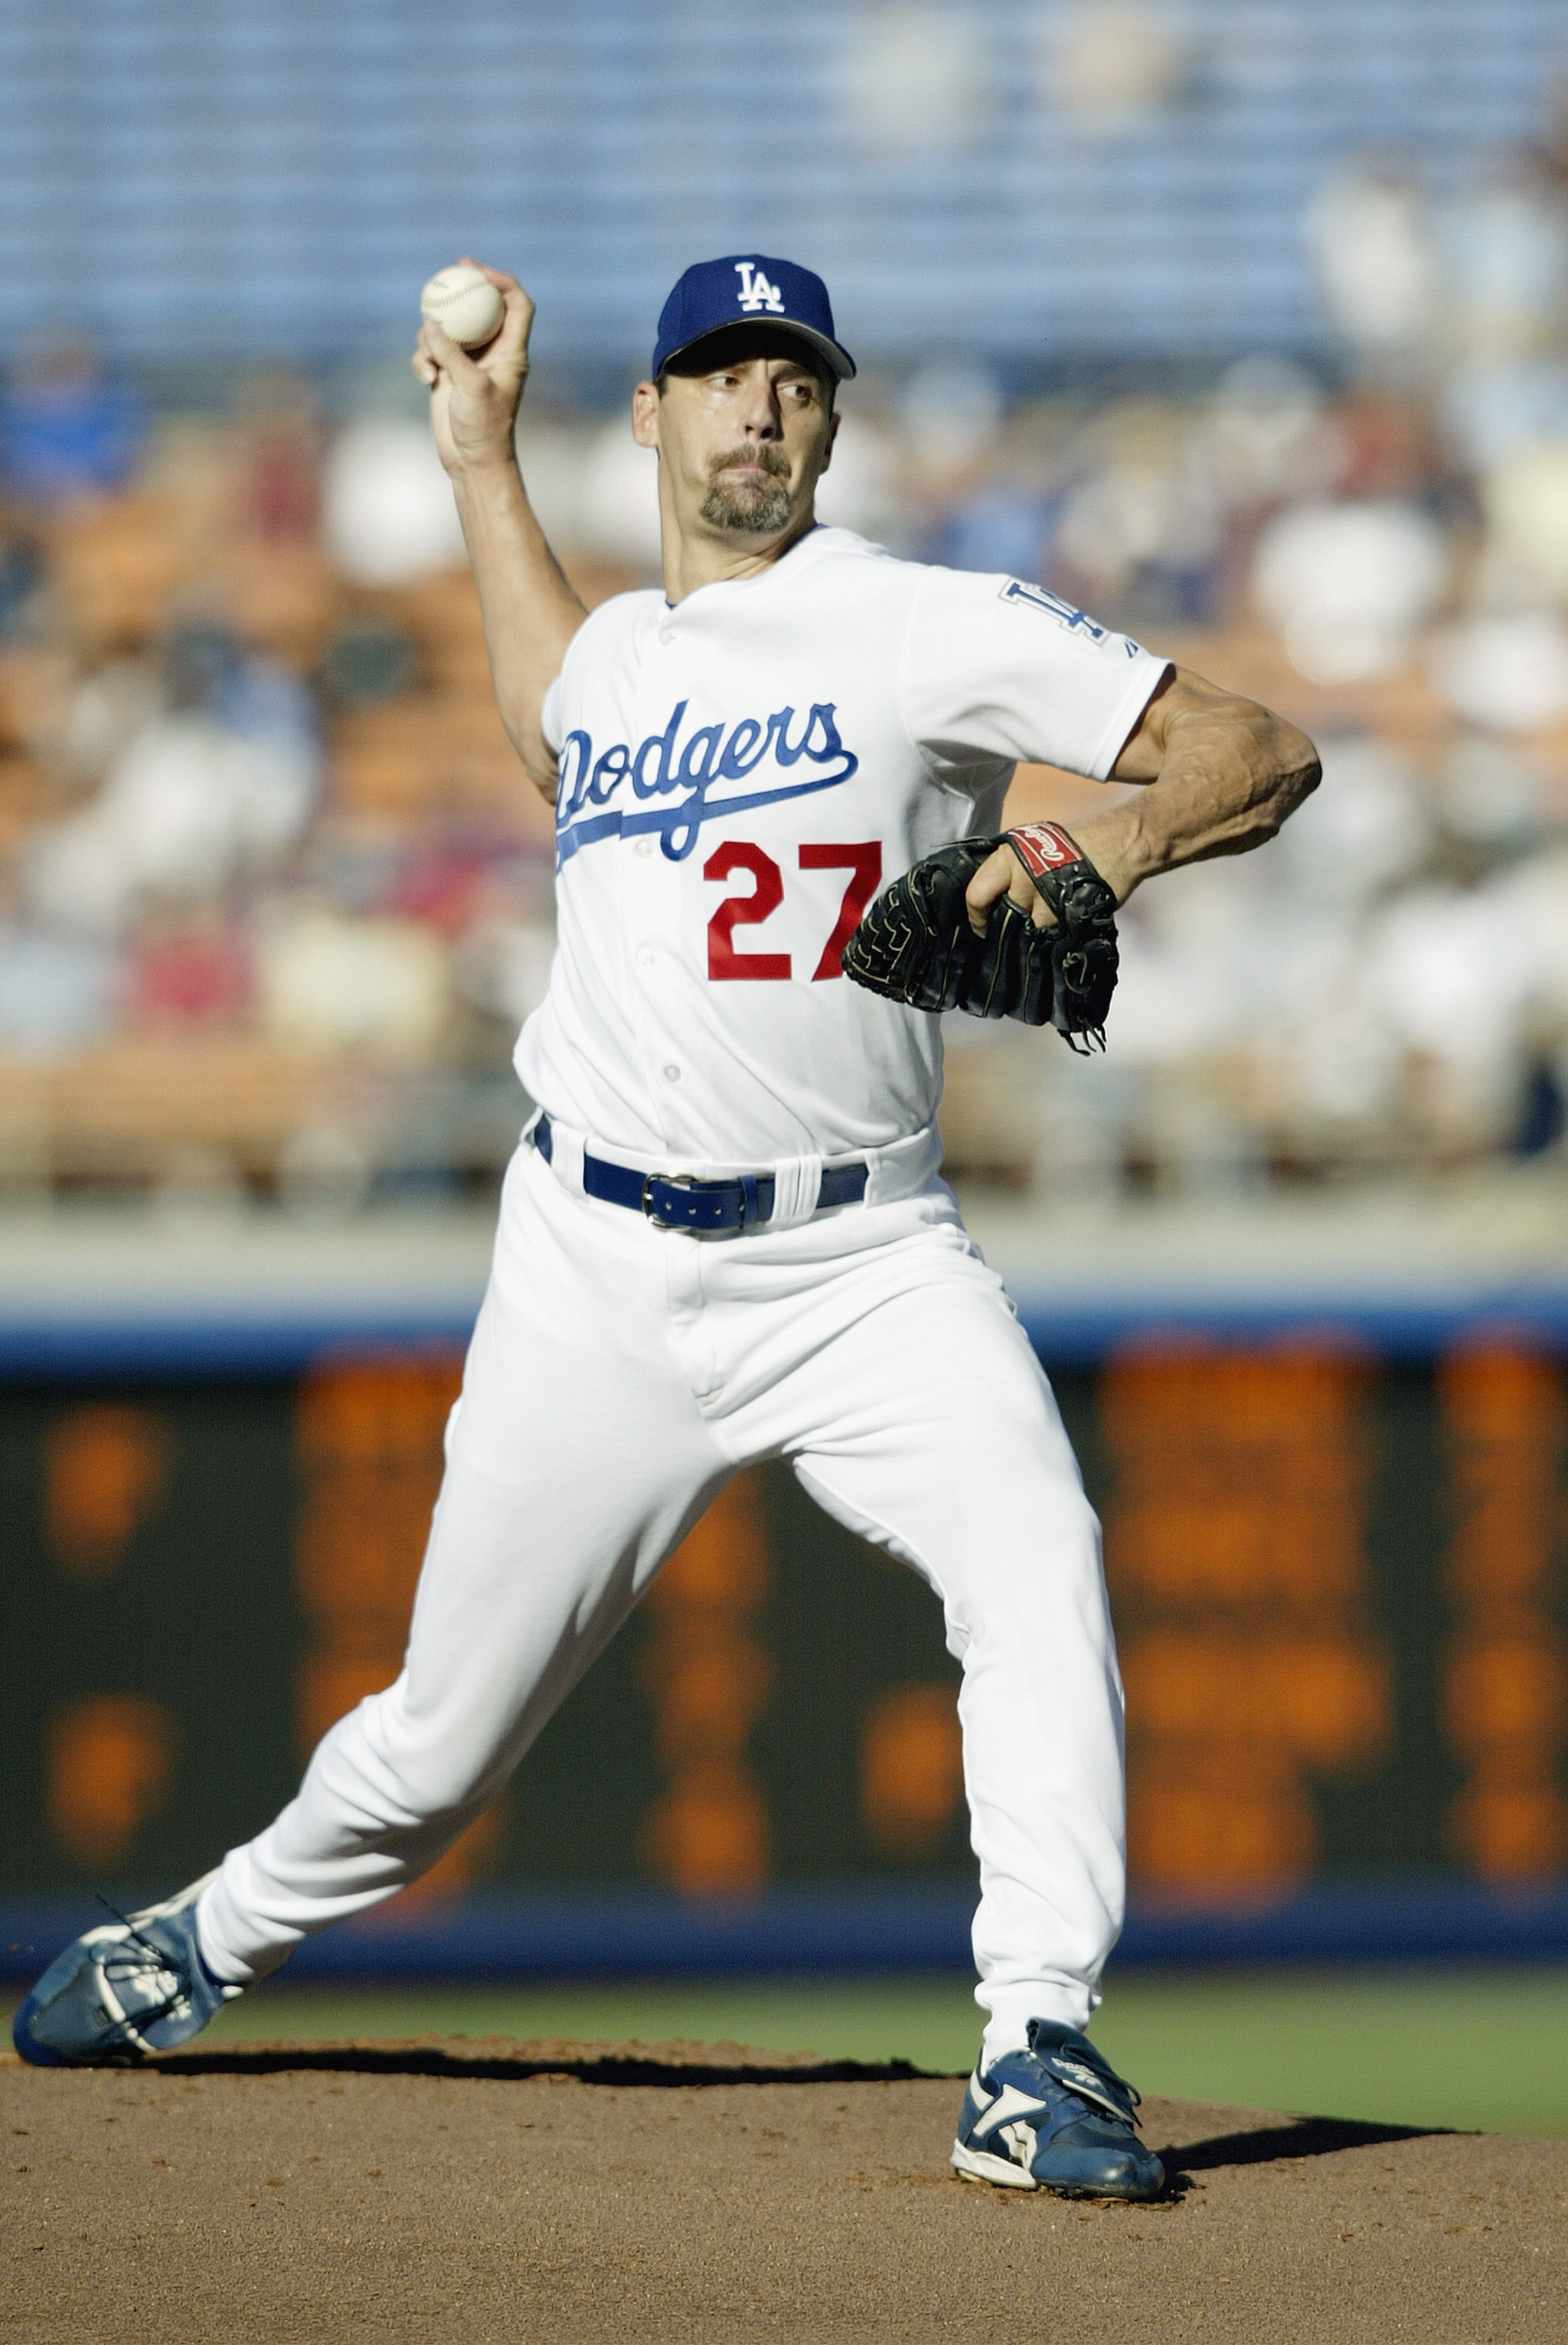 LOS ANGELES - AUGUST 24:  Starting pitcher Kevin Brown #27 of the Los Angeles Dodgers delivers a pitch during the National League game against the New York Mets at Dodgers Stadium on August 24, 2003 in Los Angeles, California. The Mets defeated the Dodger